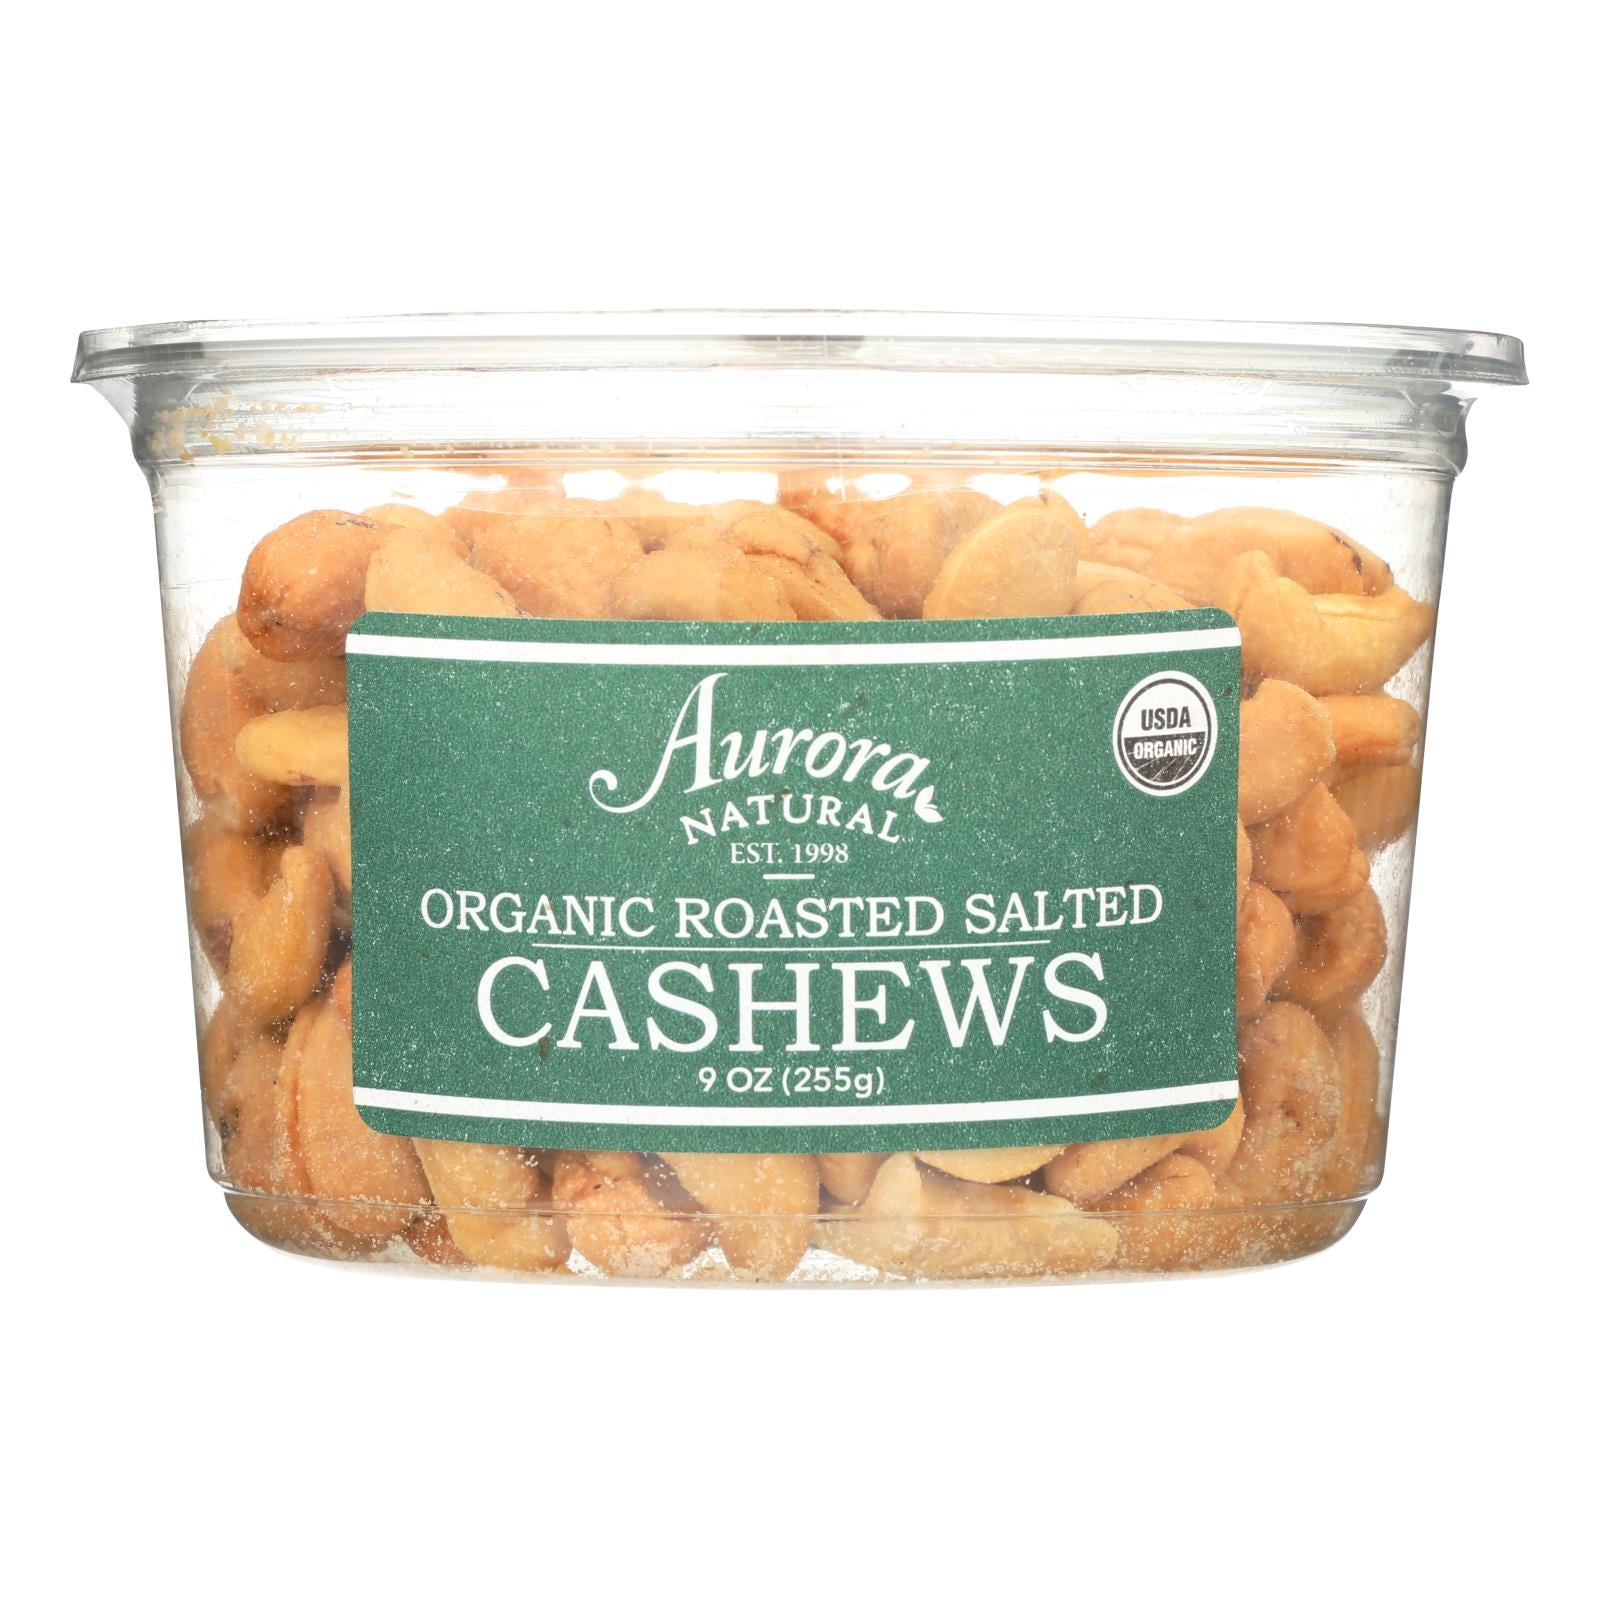 Aurora Natural Products, Aurora Natural Products - Organic Roasted Salted Cashews - Case of 12 - 9 oz. (Pack of 12)